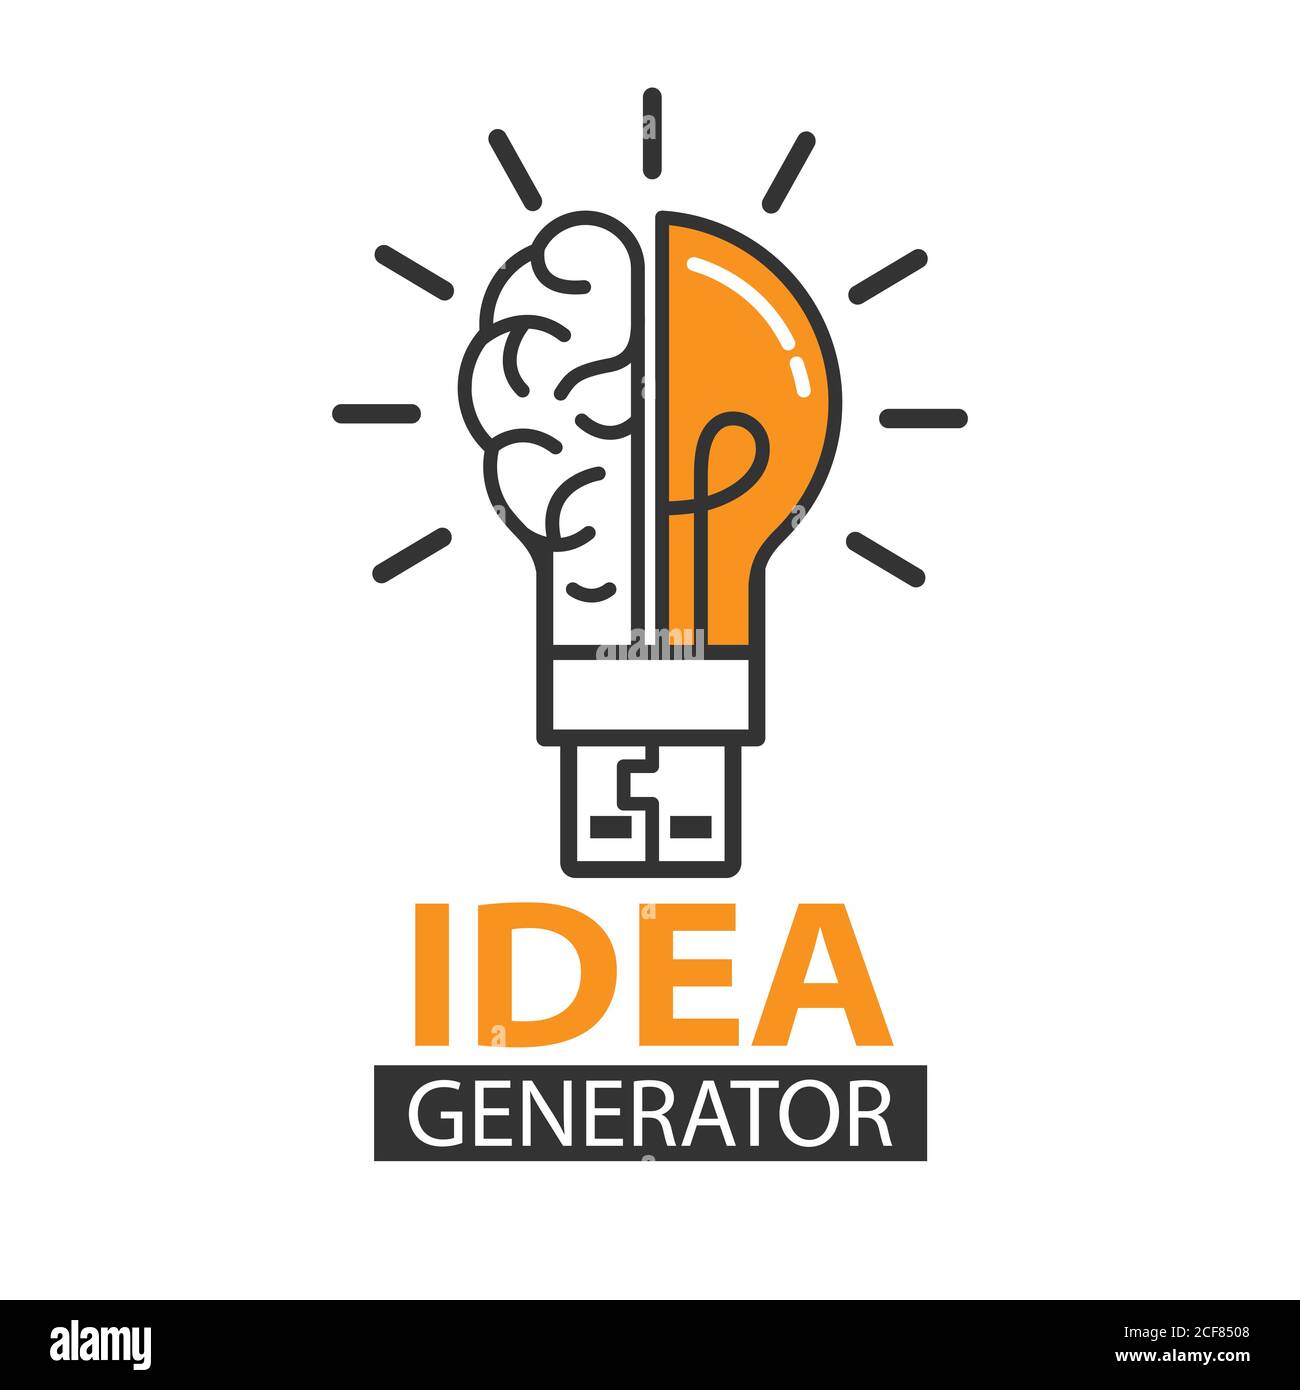 https://c8.alamy.com/comp/2CF8508/idea-generator-the-human-brain-and-the-light-bulb-editable-vector-illustration-for-website-booklet-project-and-creative-design-stock-image-isola-2CF8508.jpg